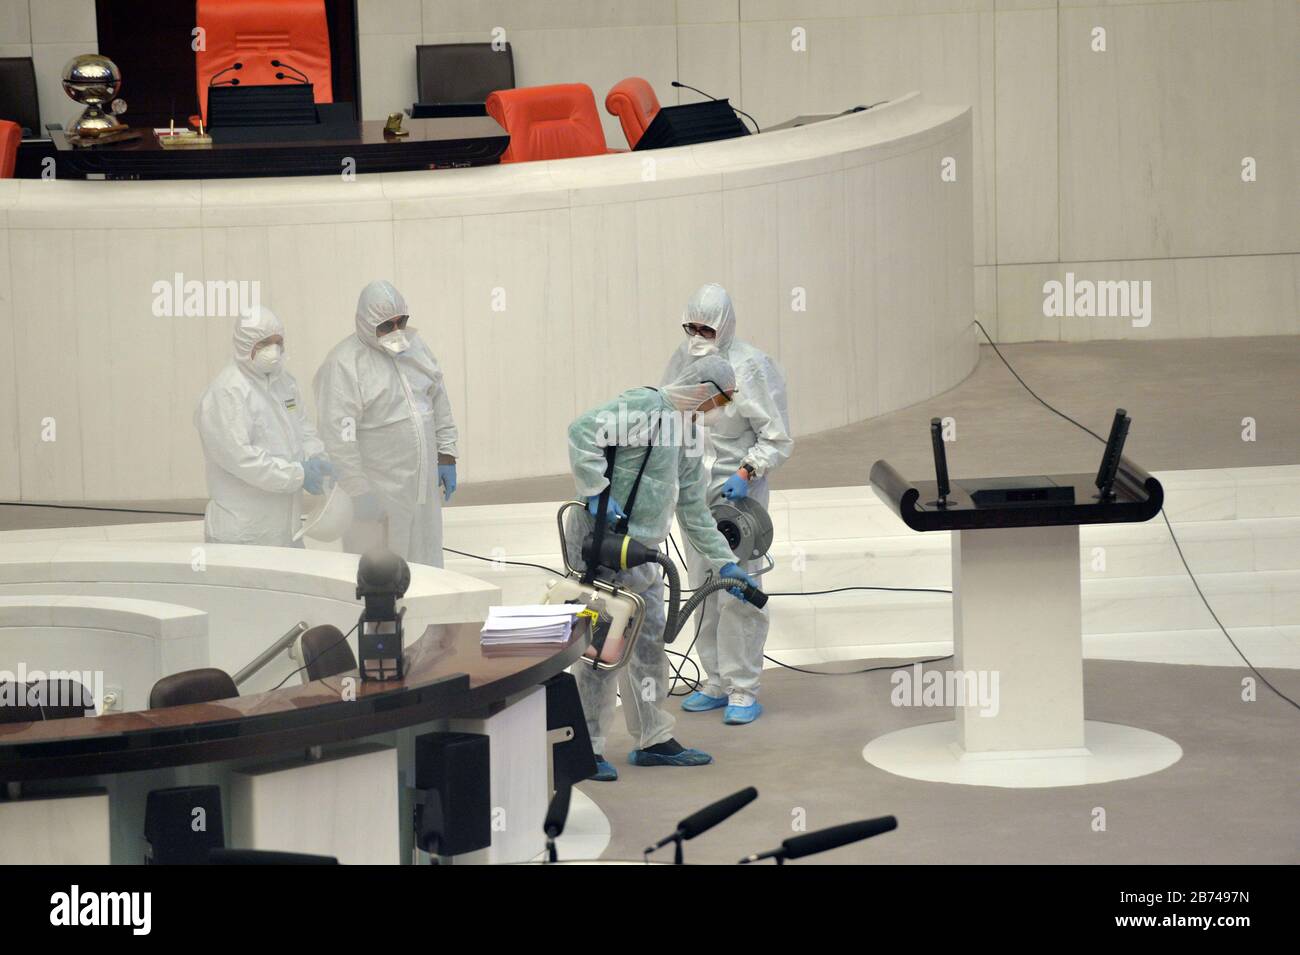 Ankara, Turkey. 13th Mar, 2020. Staff members spray disinfectant at the parliament in Ankara, Turkey, March 13, 2020. Turkish Health Minister Fahrettin Koca announced on Friday that the second patient has been diagnosed with COVID-19 in Turkey. Credit: Mustafa Kaya/Xinhua/Alamy Live News Stock Photo